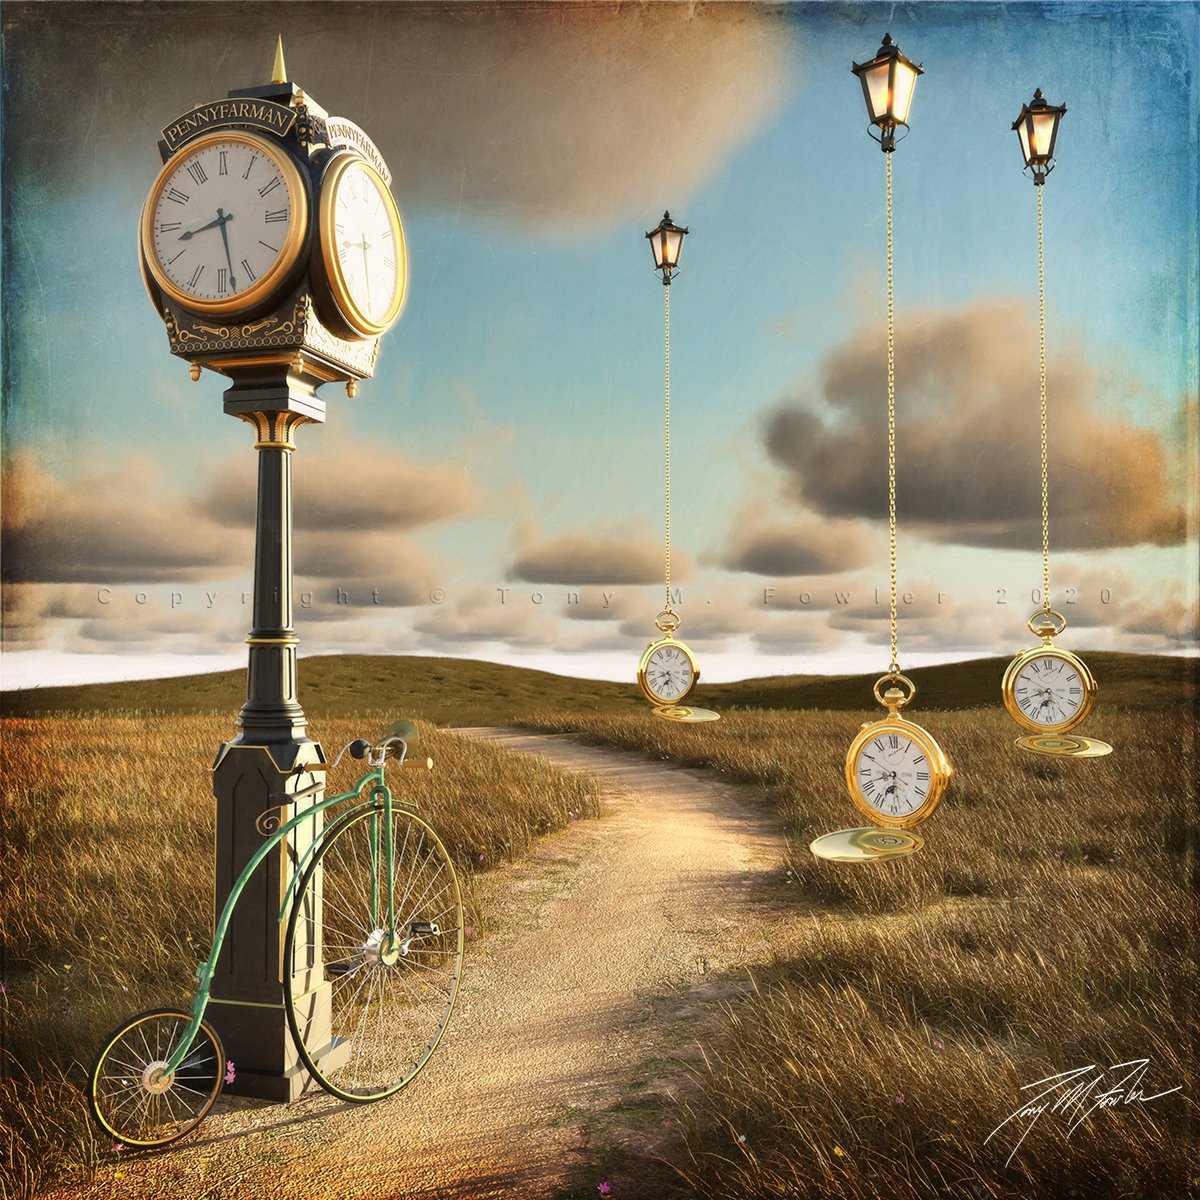 Time Stand Still by Tony Fowler